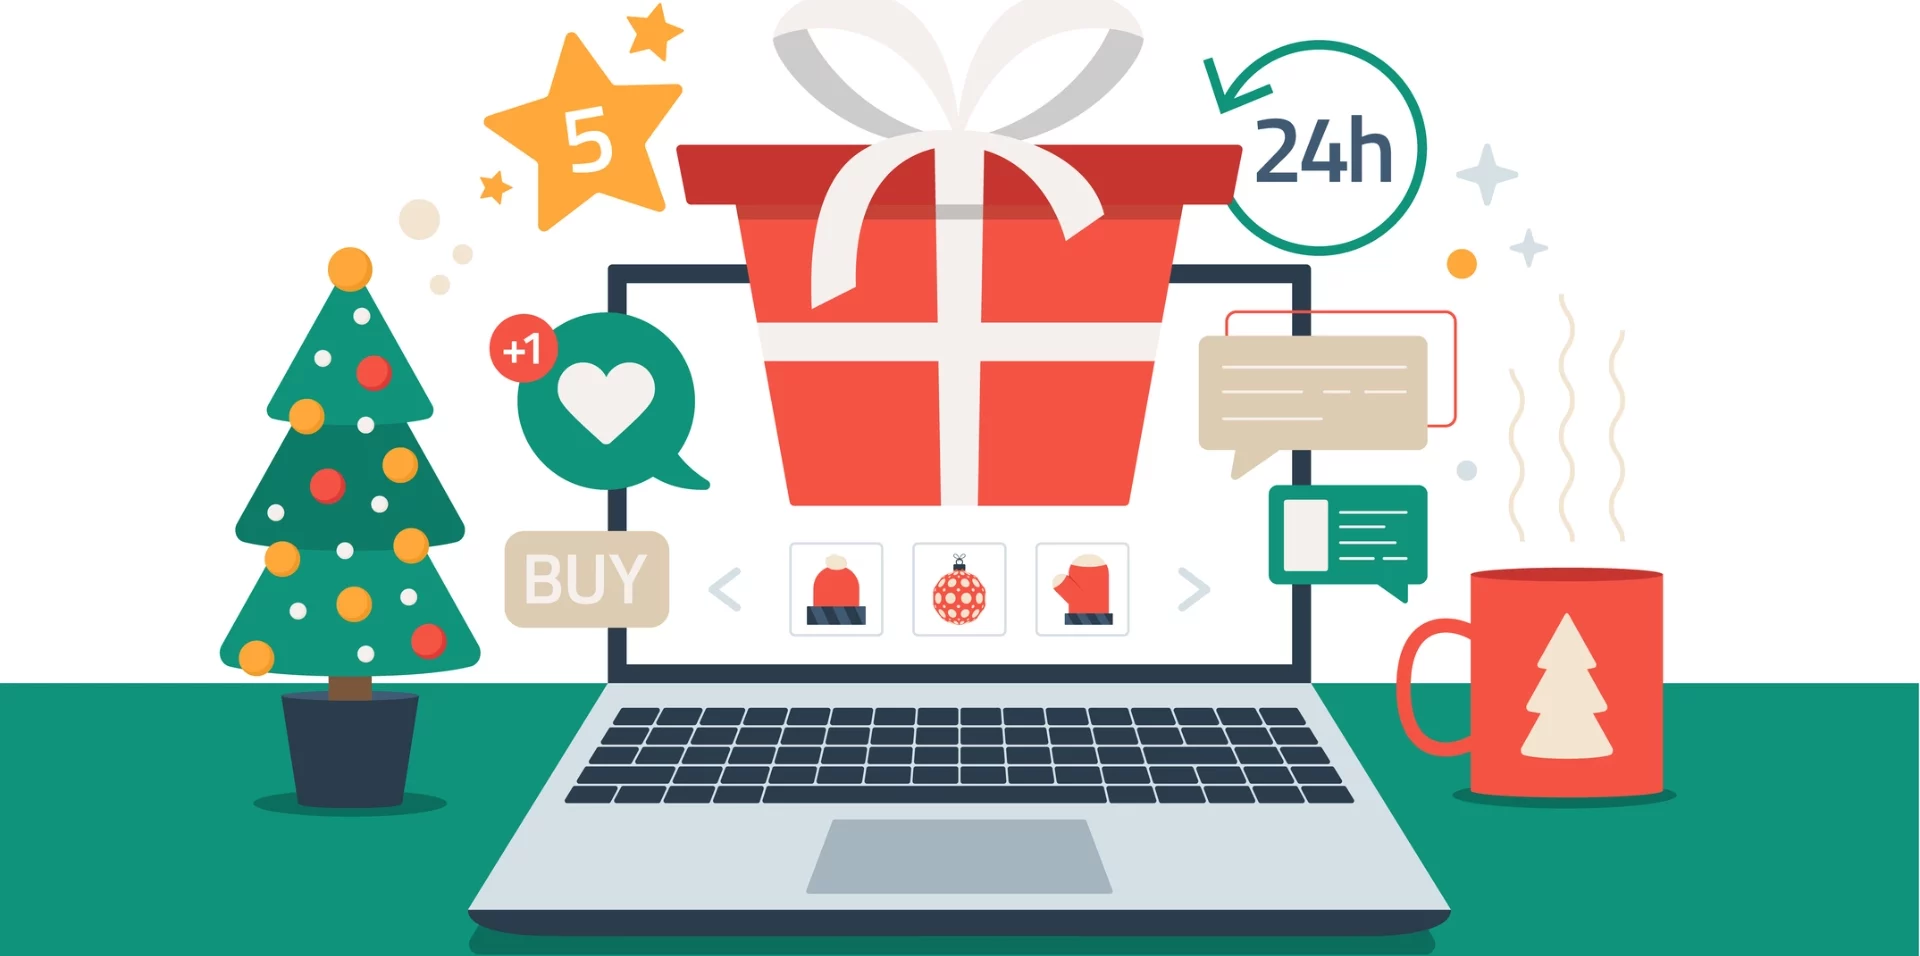 Cartoon image of a laptop with a Christmas present, shopping icons and a Christmas tree